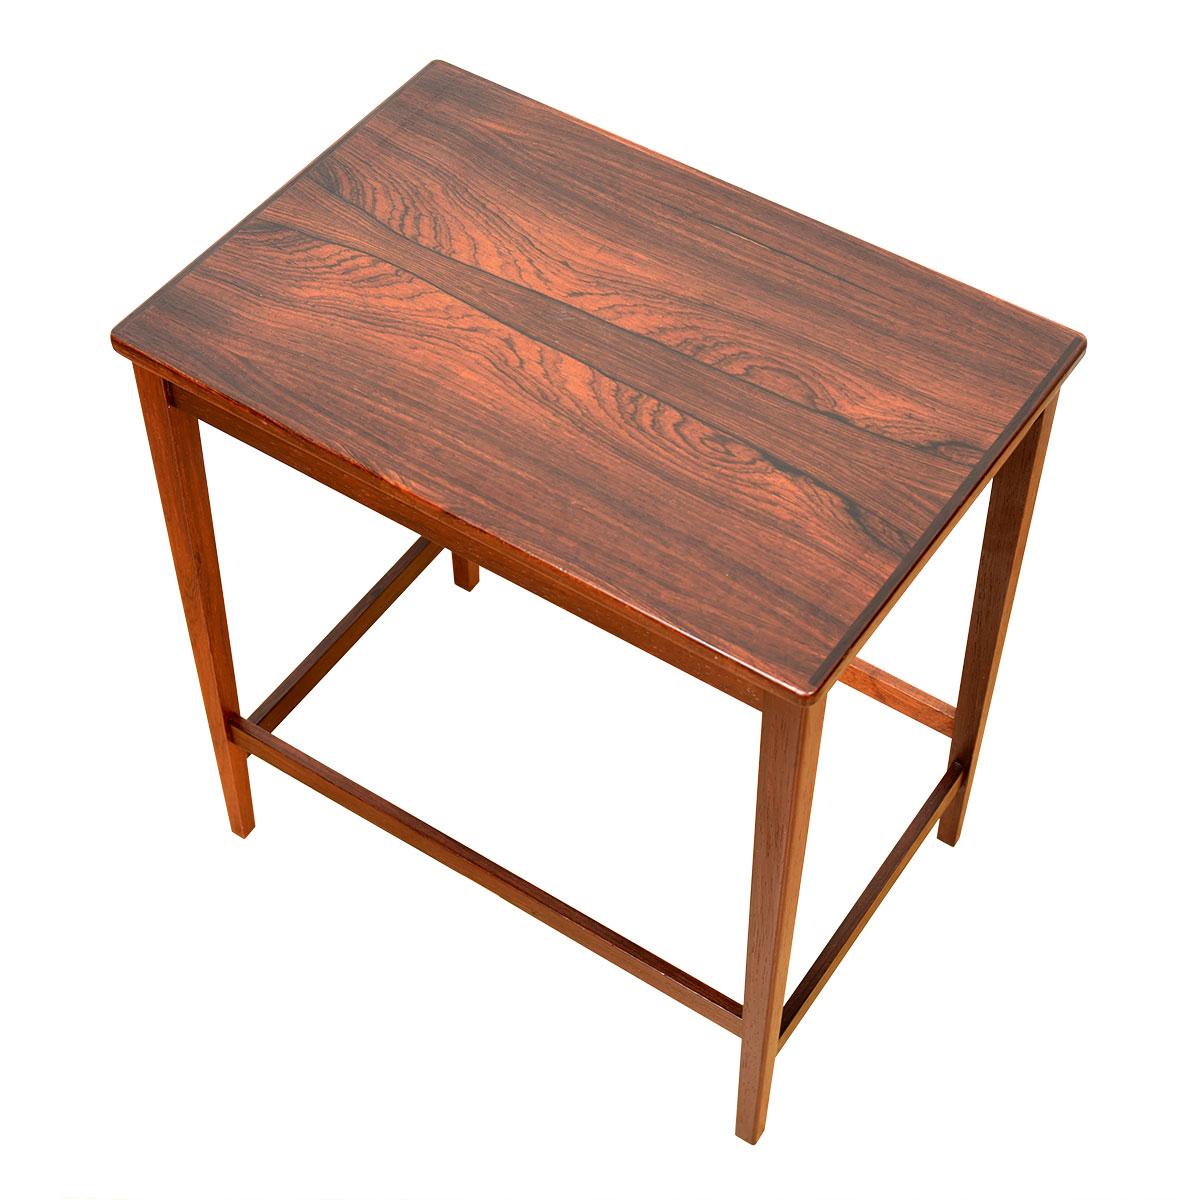 Set of 3 Danish Modern Rosewood Nesting Tables In Excellent Condition For Sale In Kensington, MD